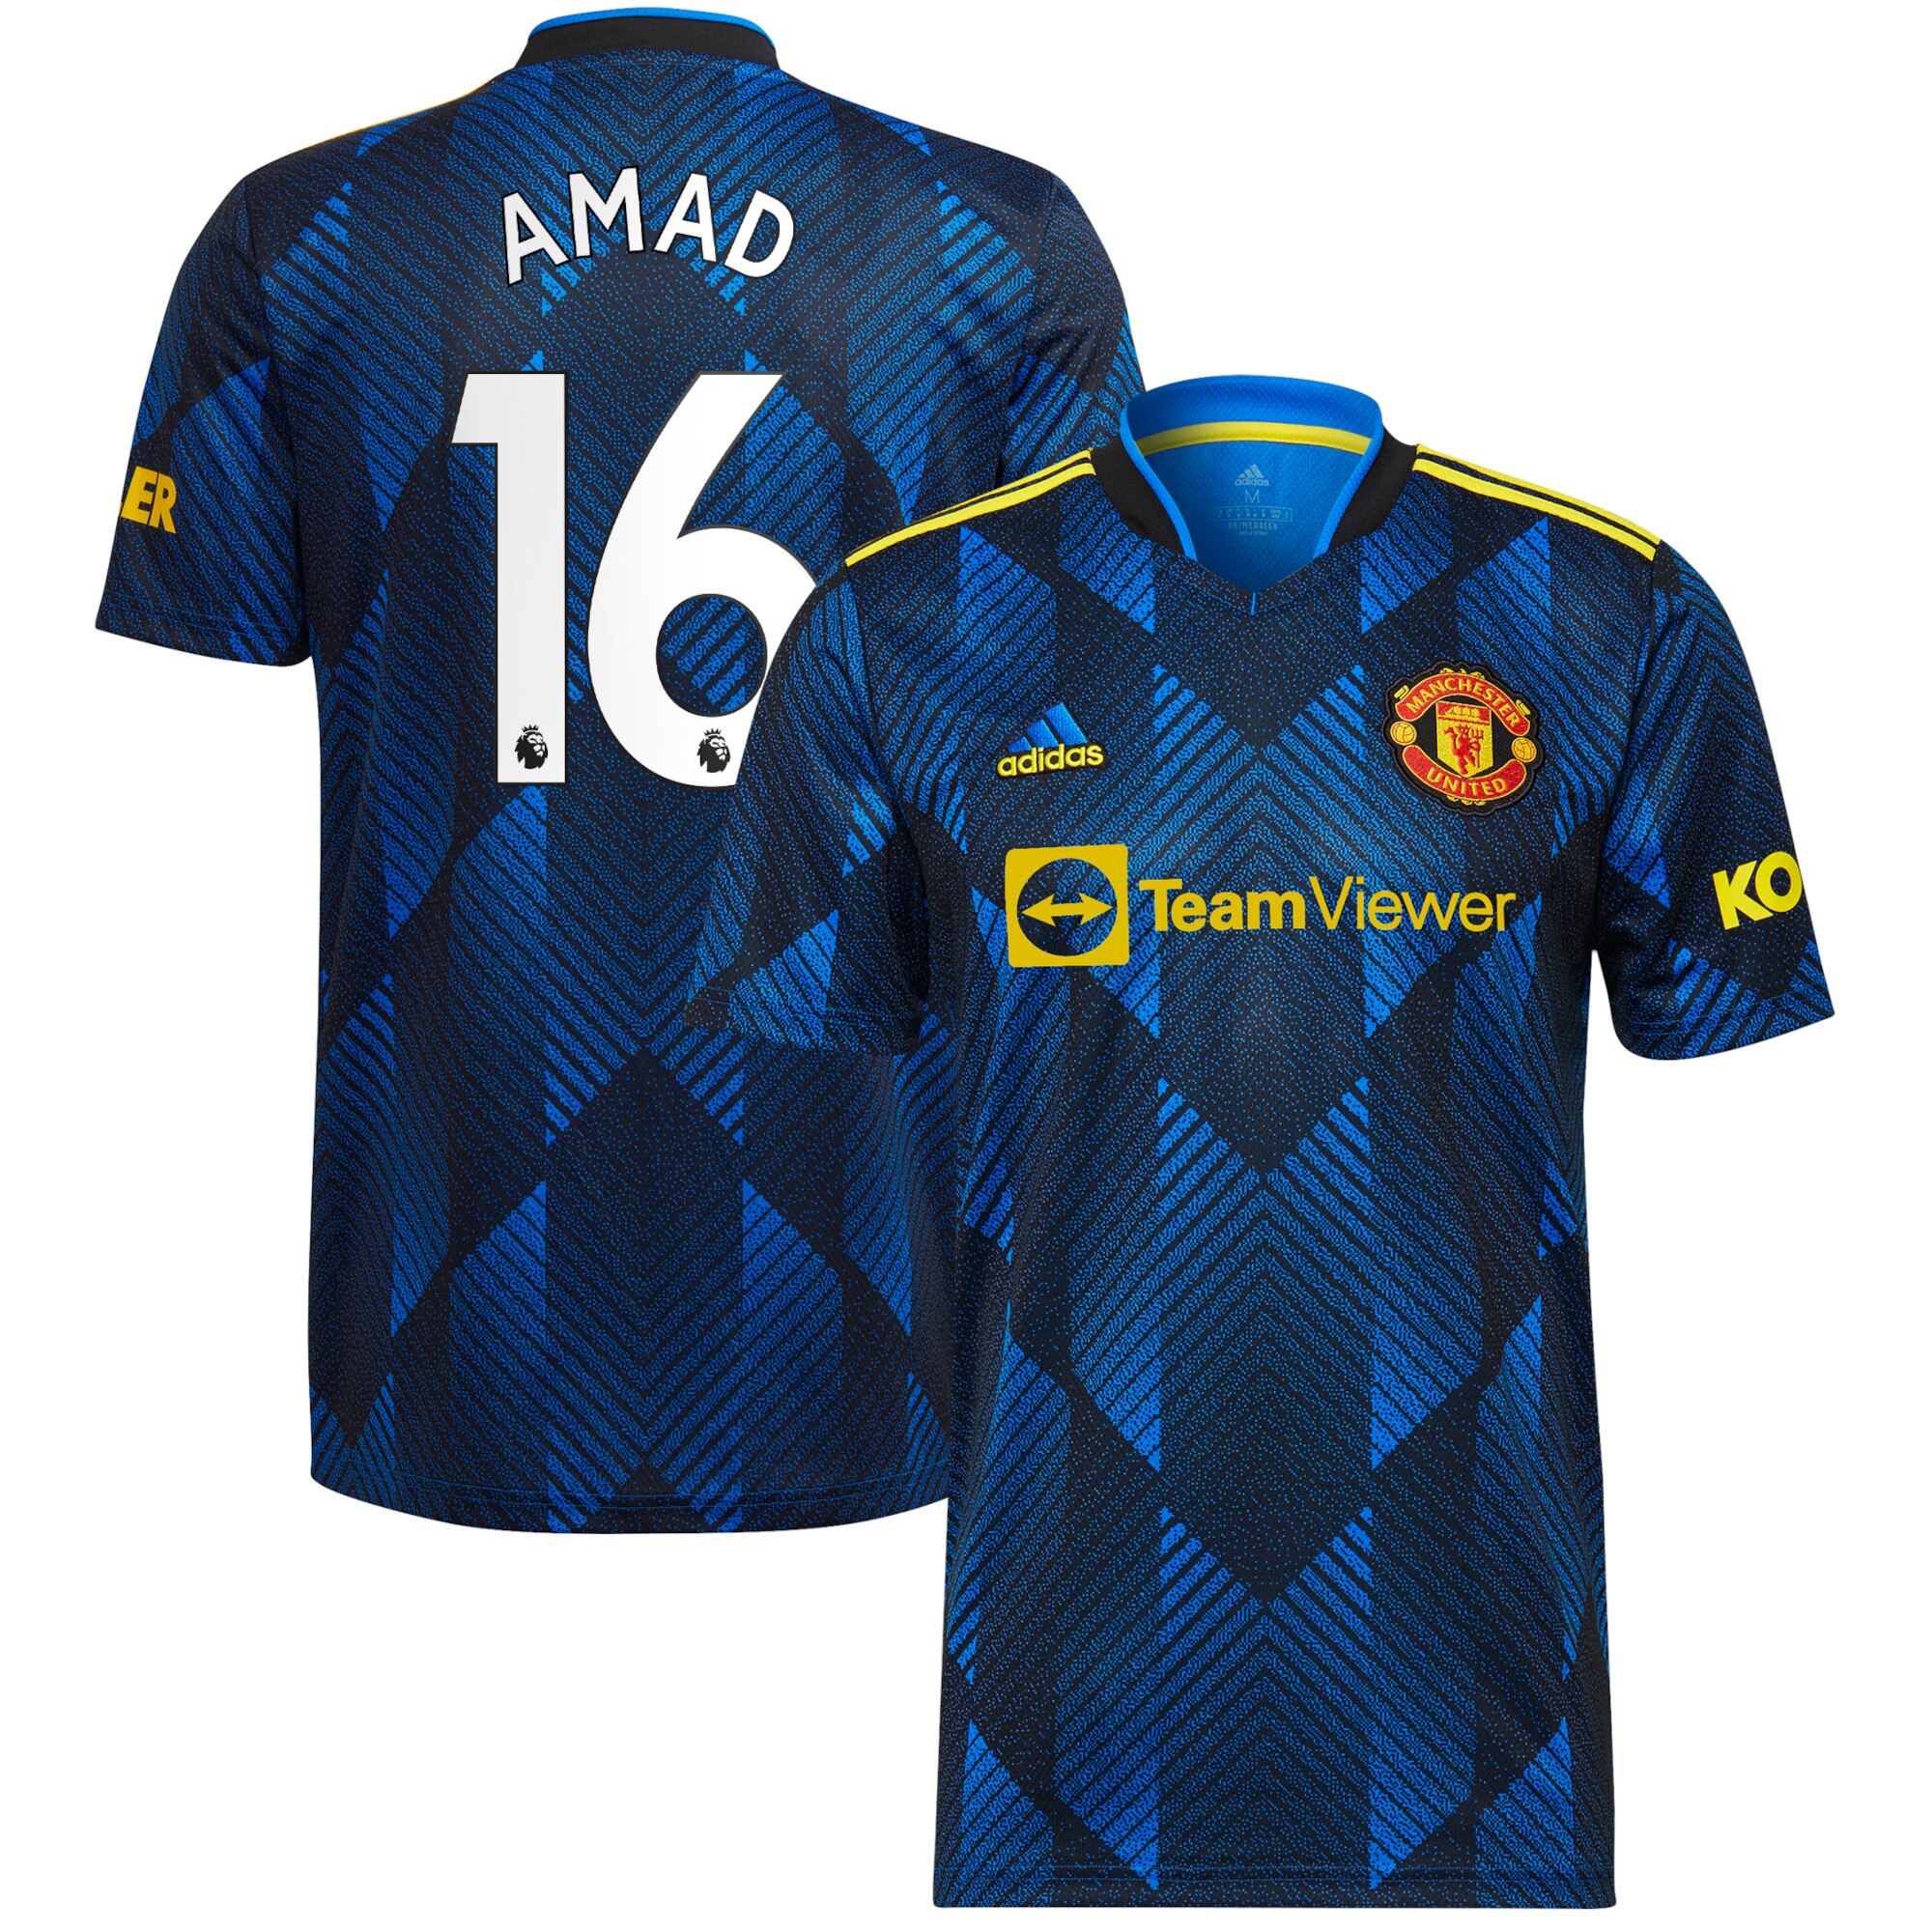 Manchester United Third Shirt 2021-22 with Amad 16 printing